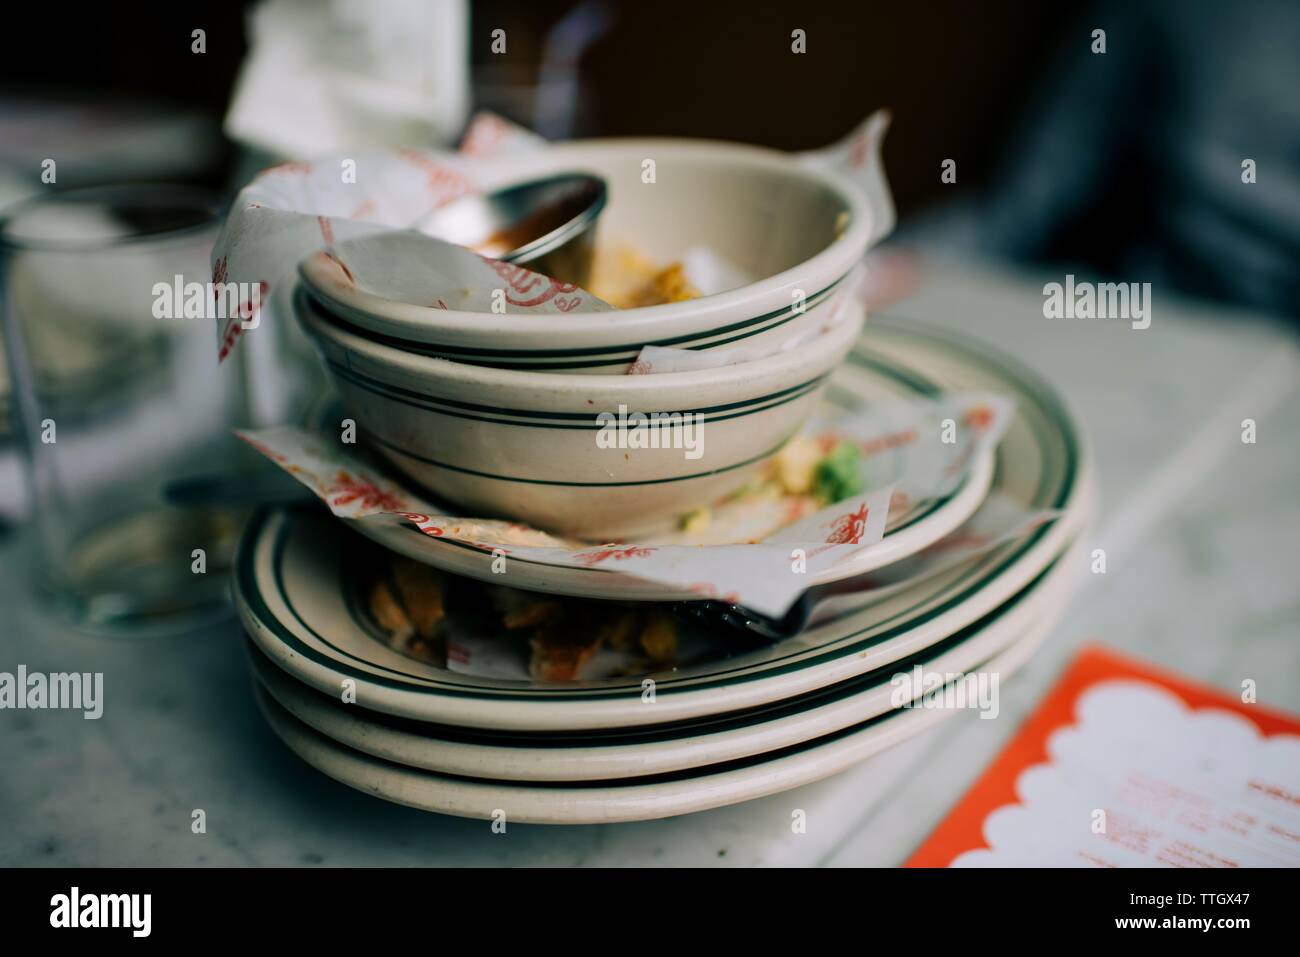 dirty dishes stacked up on a restaurant table with leftover food Stock Photo